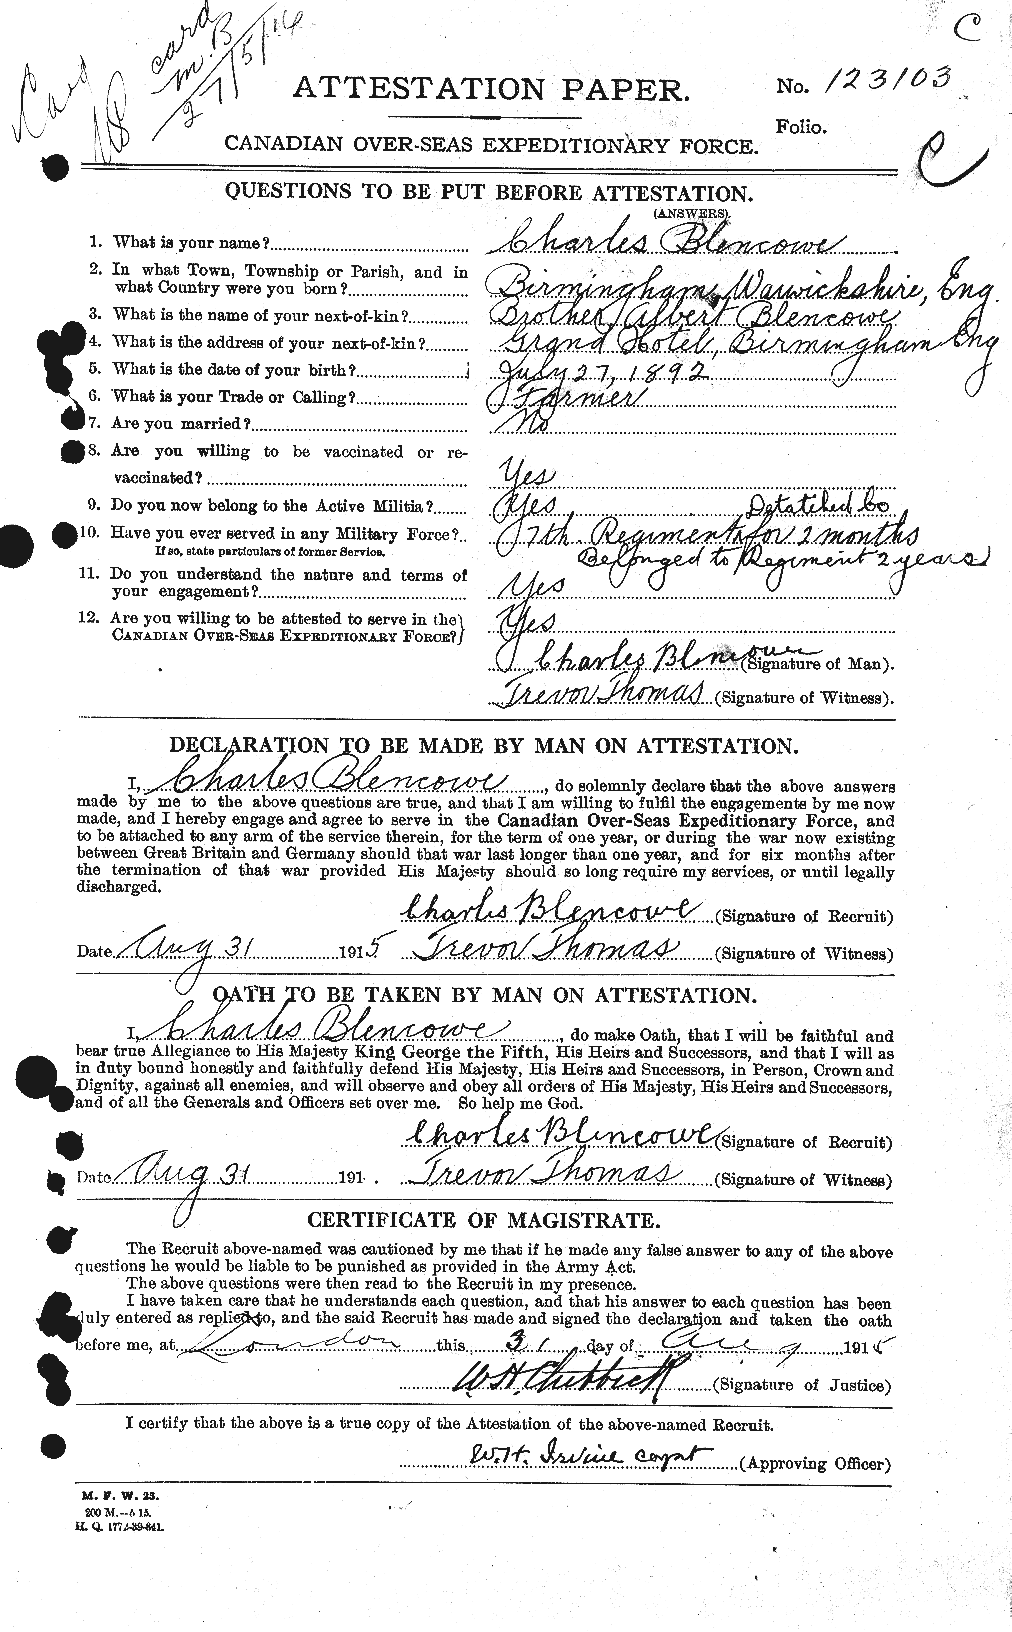 Personnel Records of the First World War - CEF 247955a